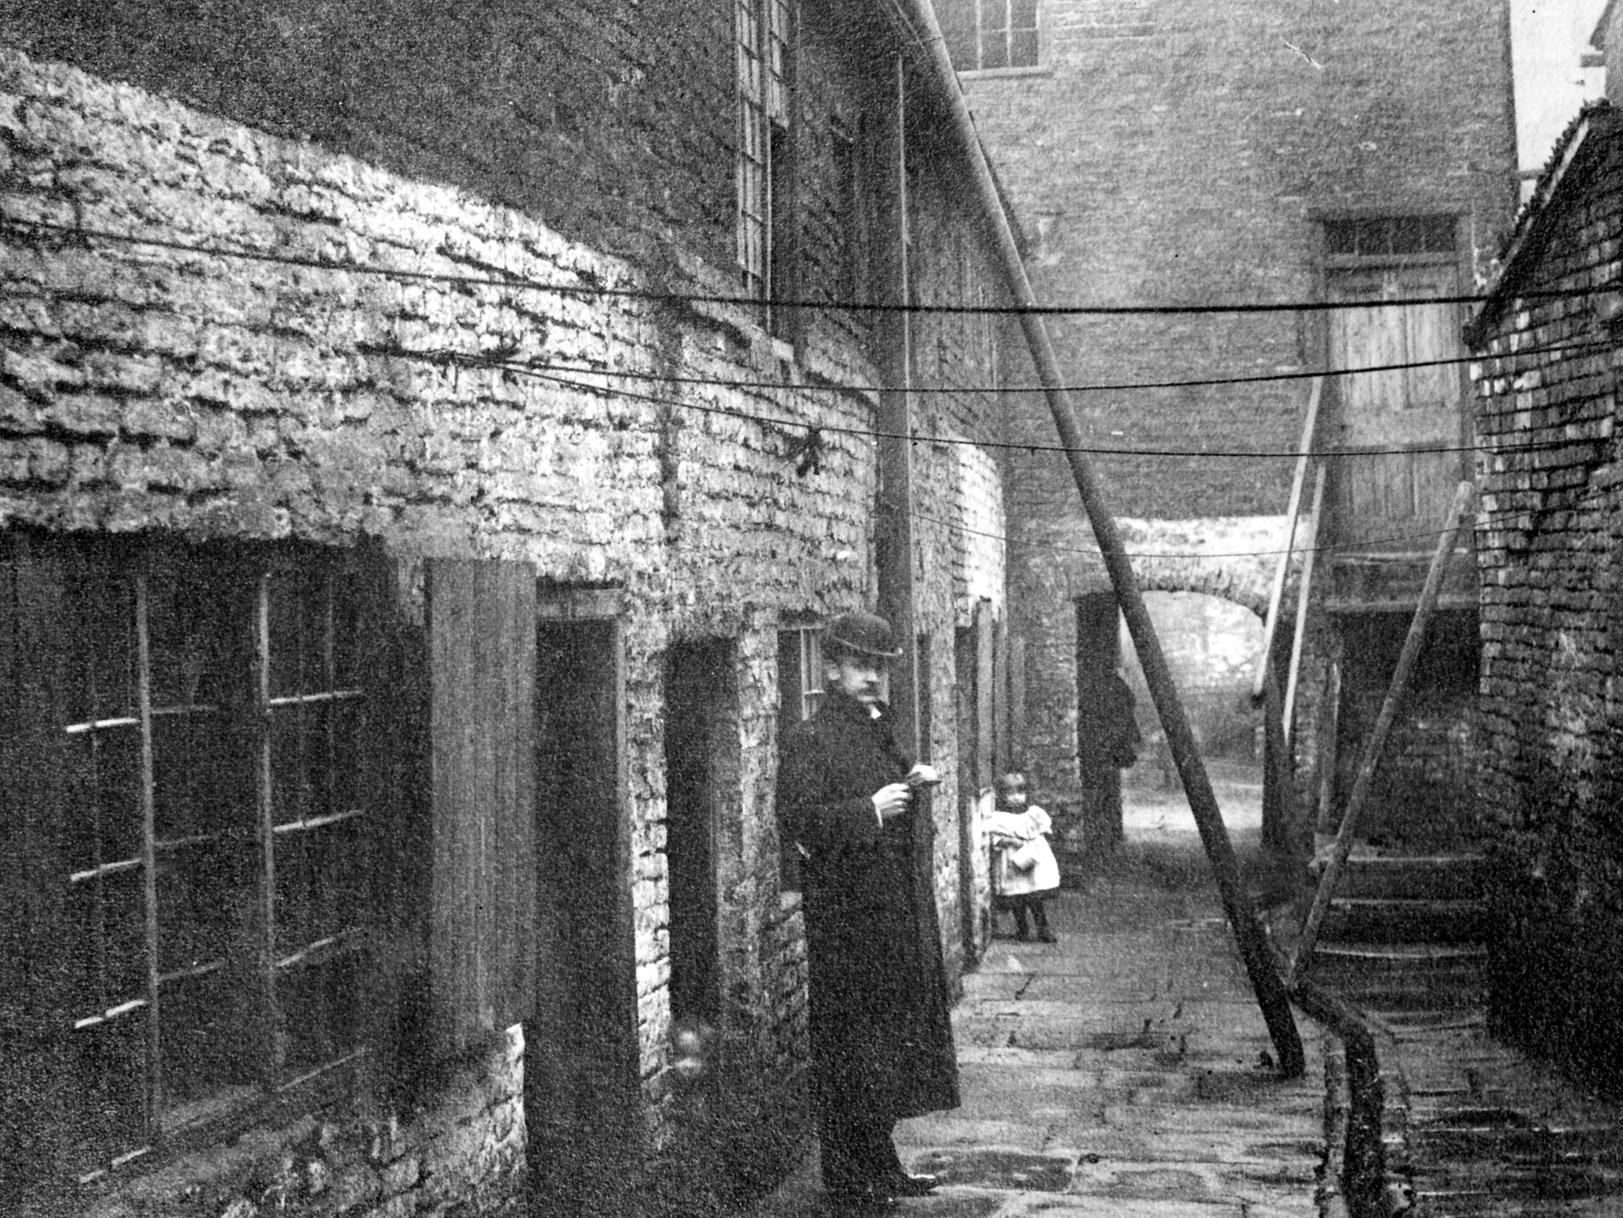 Cherry Tree Yard off Kirkgate, shows narrow alleyway. A man and child can be seen posing for the photograph which is looking north.